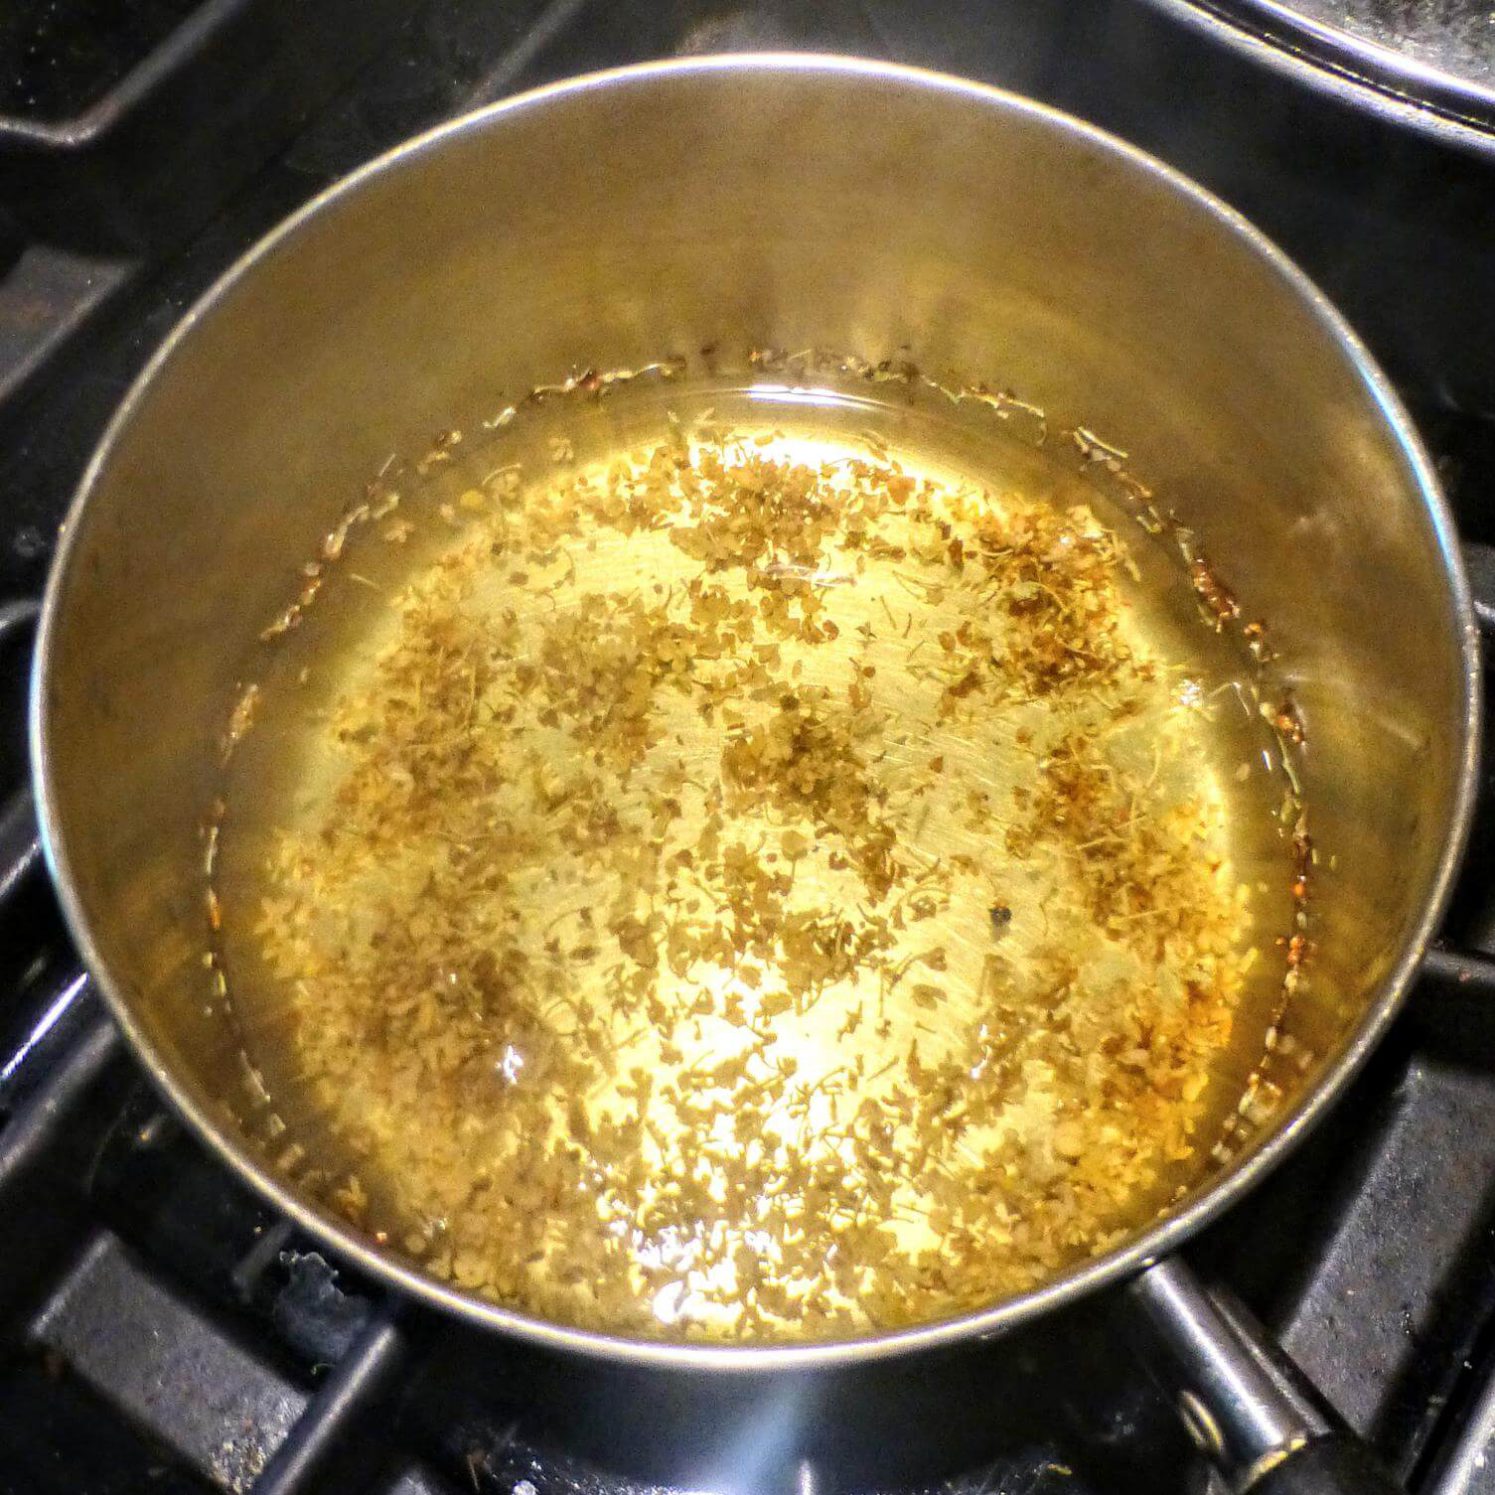 Simmering the Syrup